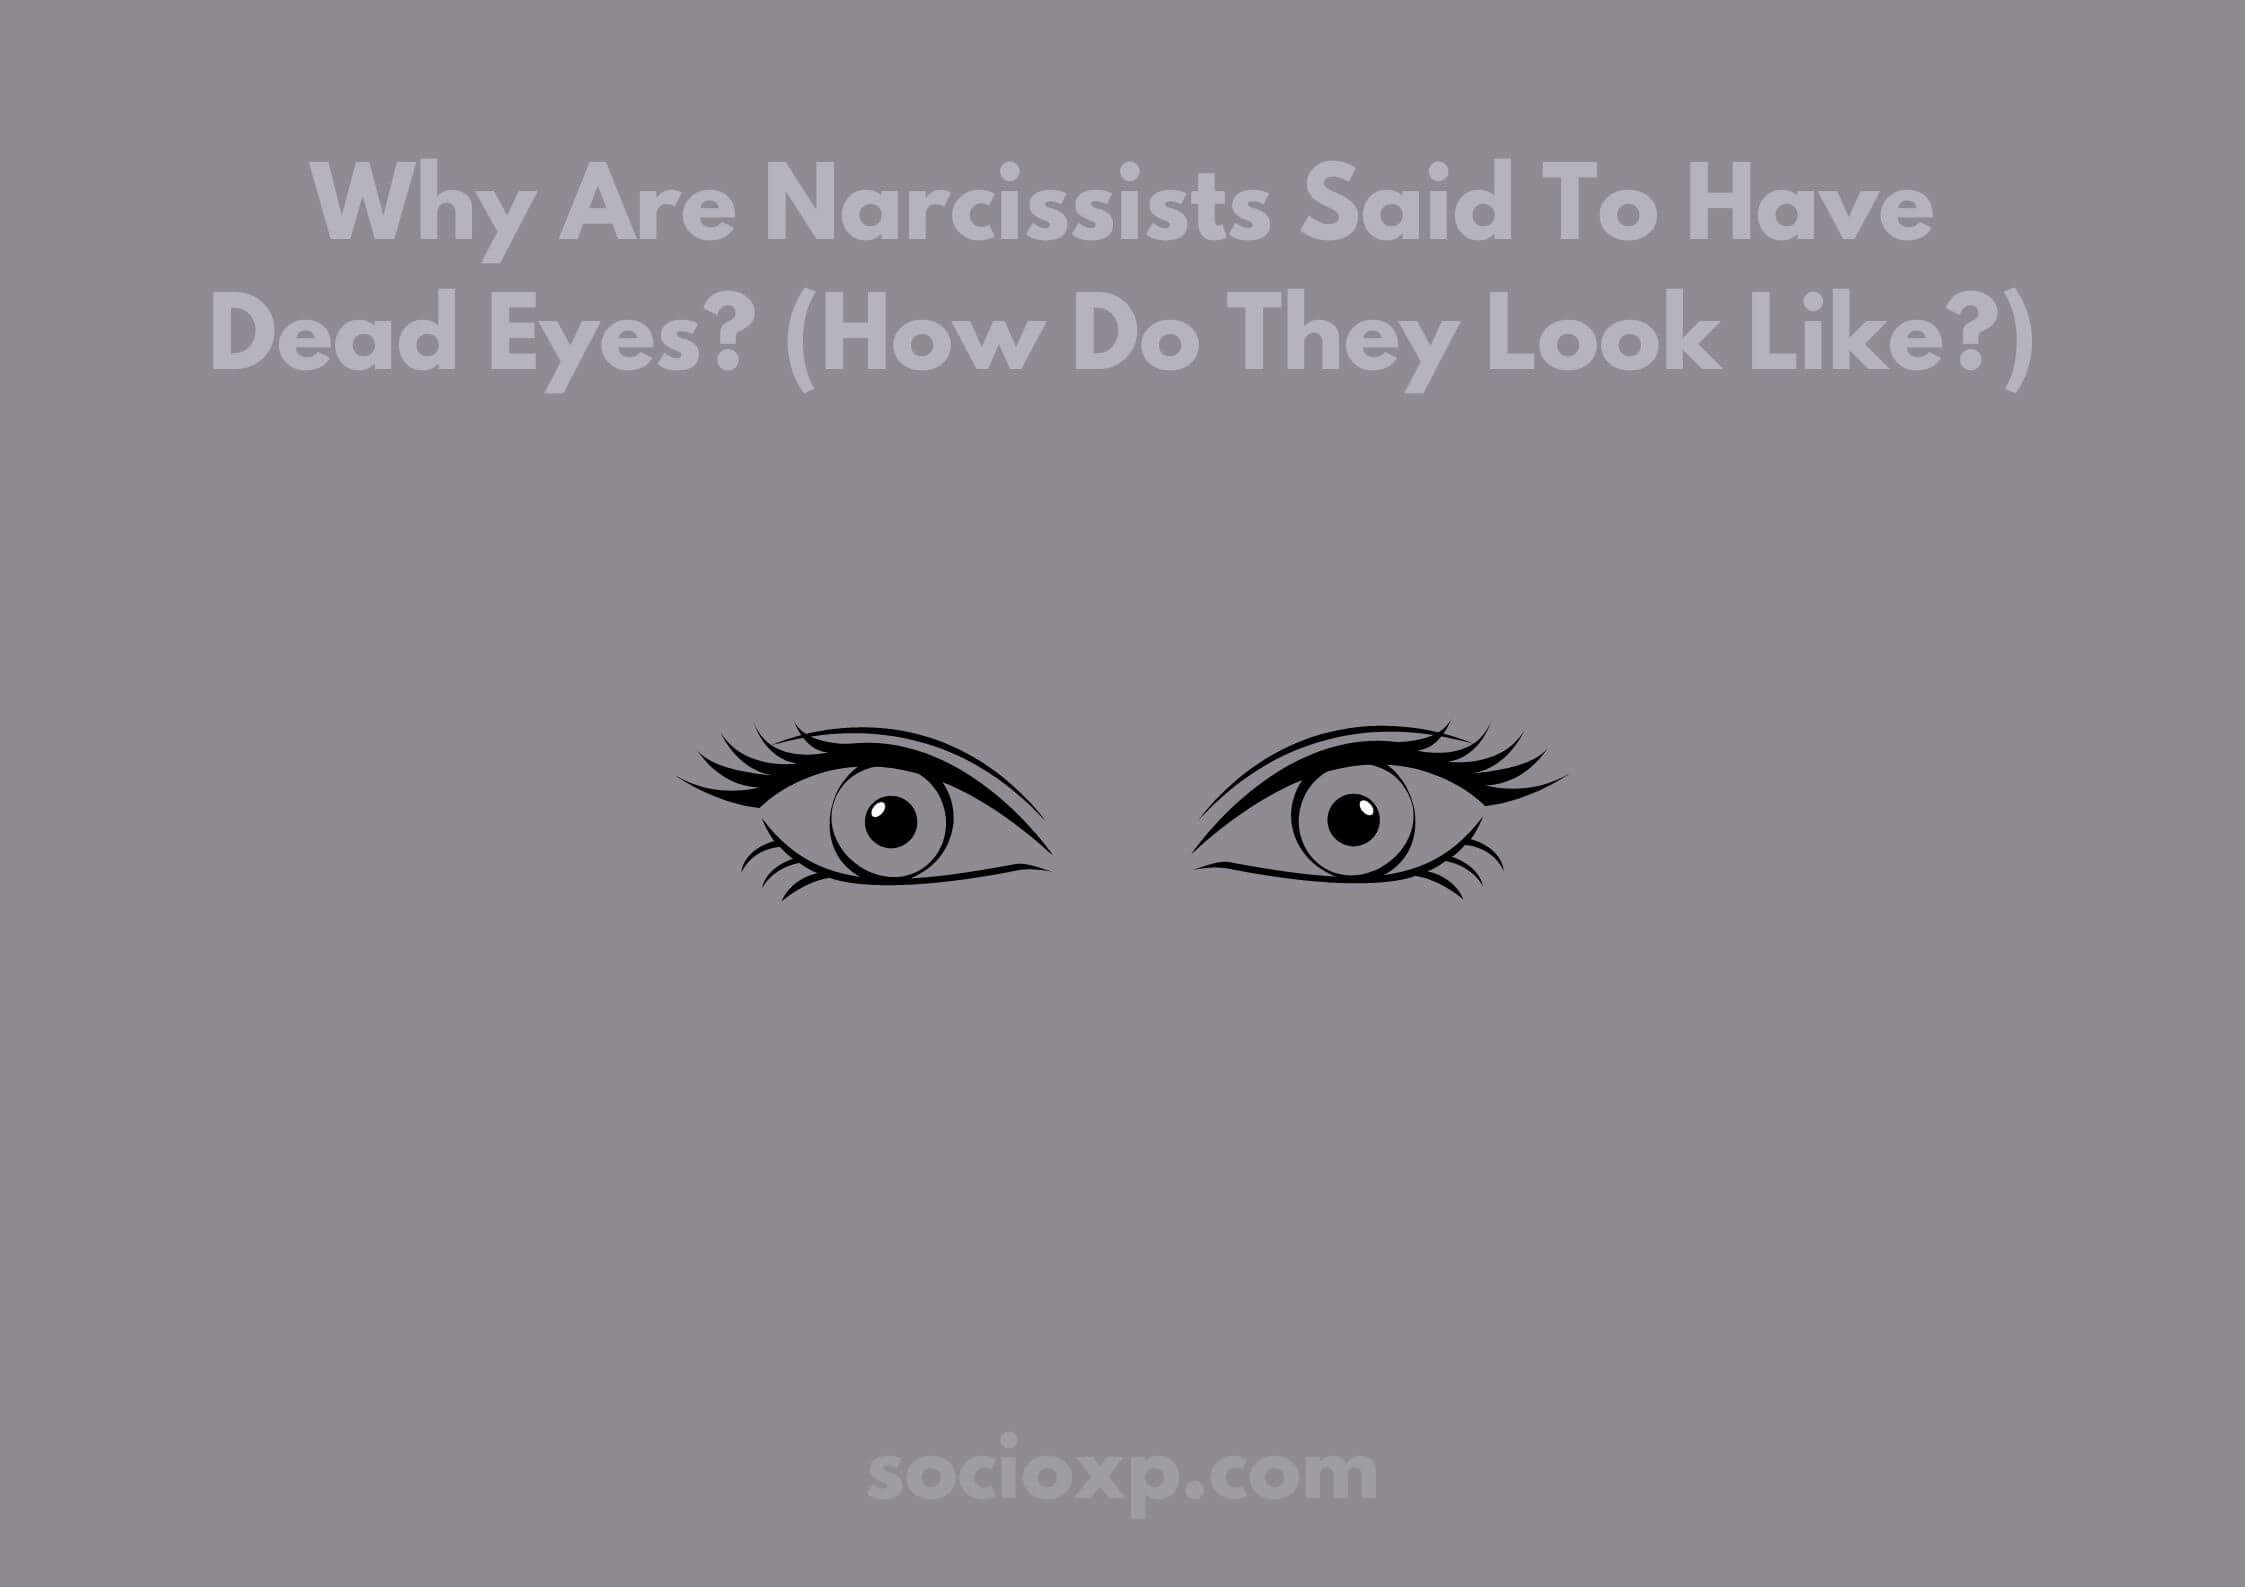 Why Are Narcissists Said To Have Dead Eyes? (How Do They Look Like?)